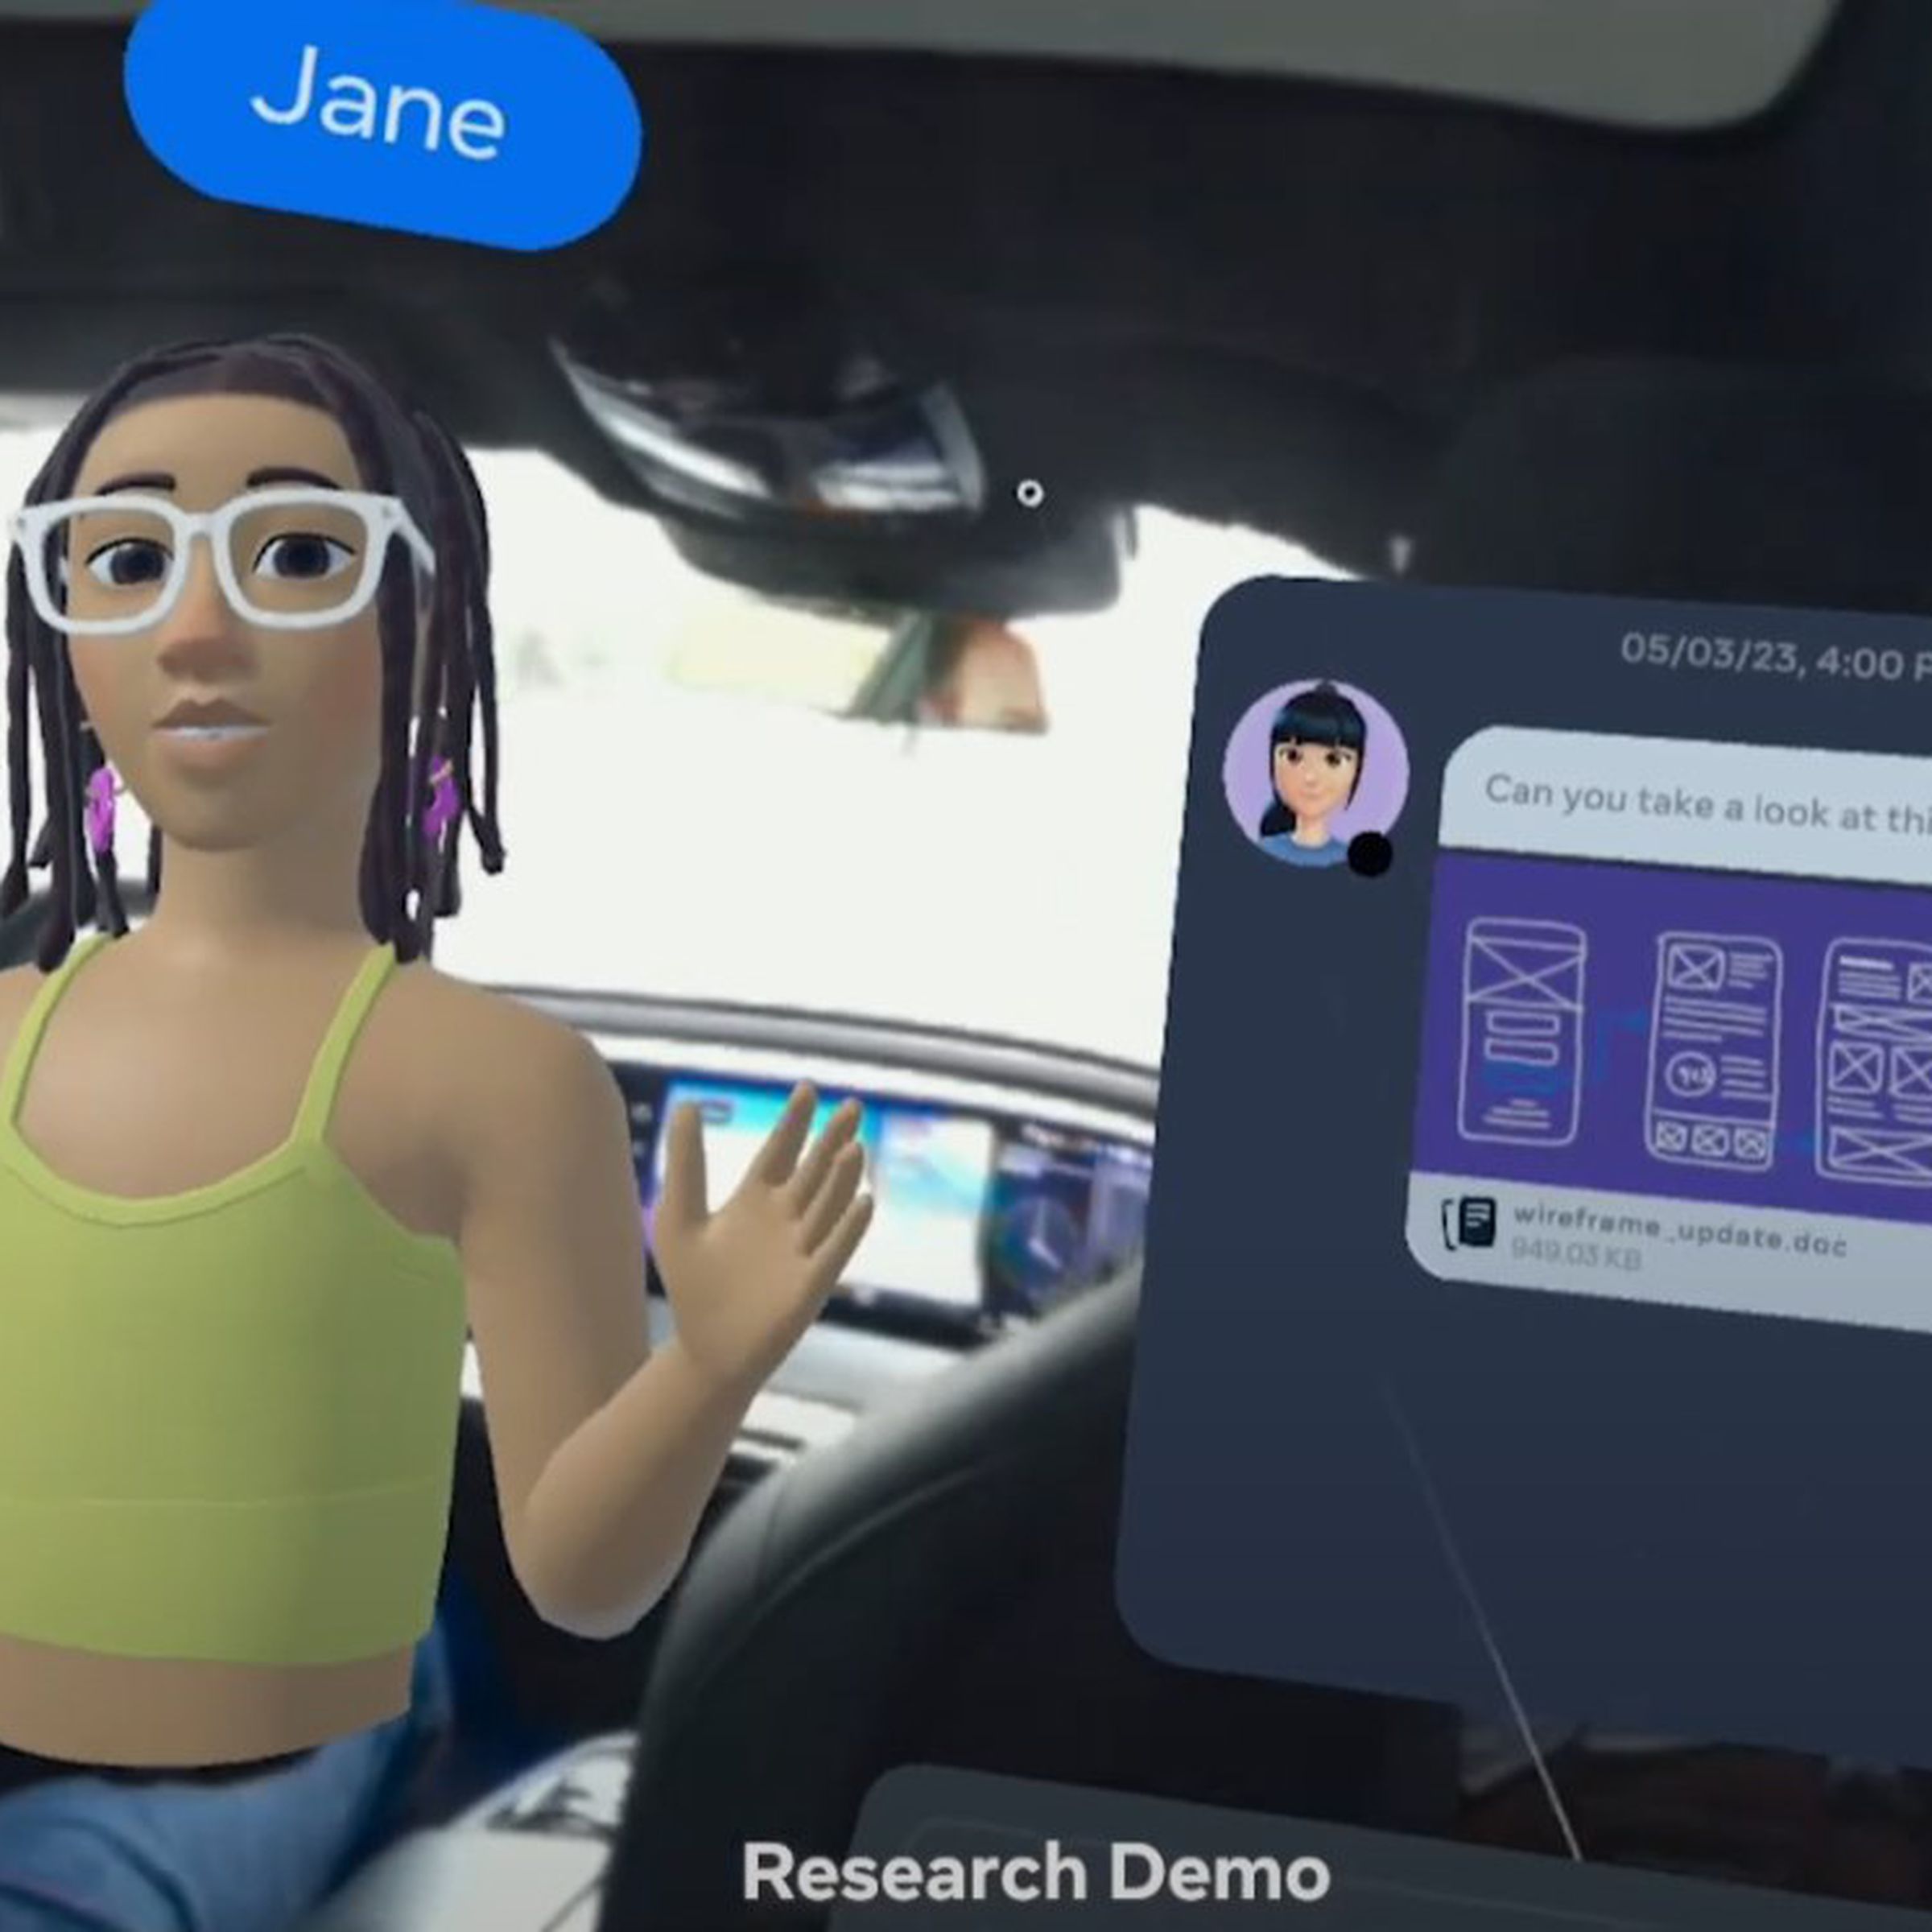 An image showing a mixed reality interface projected in front of a person riding in the backset of a BMW, with an avatar labeled “Jane” pointing at a message from a work chat asking the viewer to look at this update.